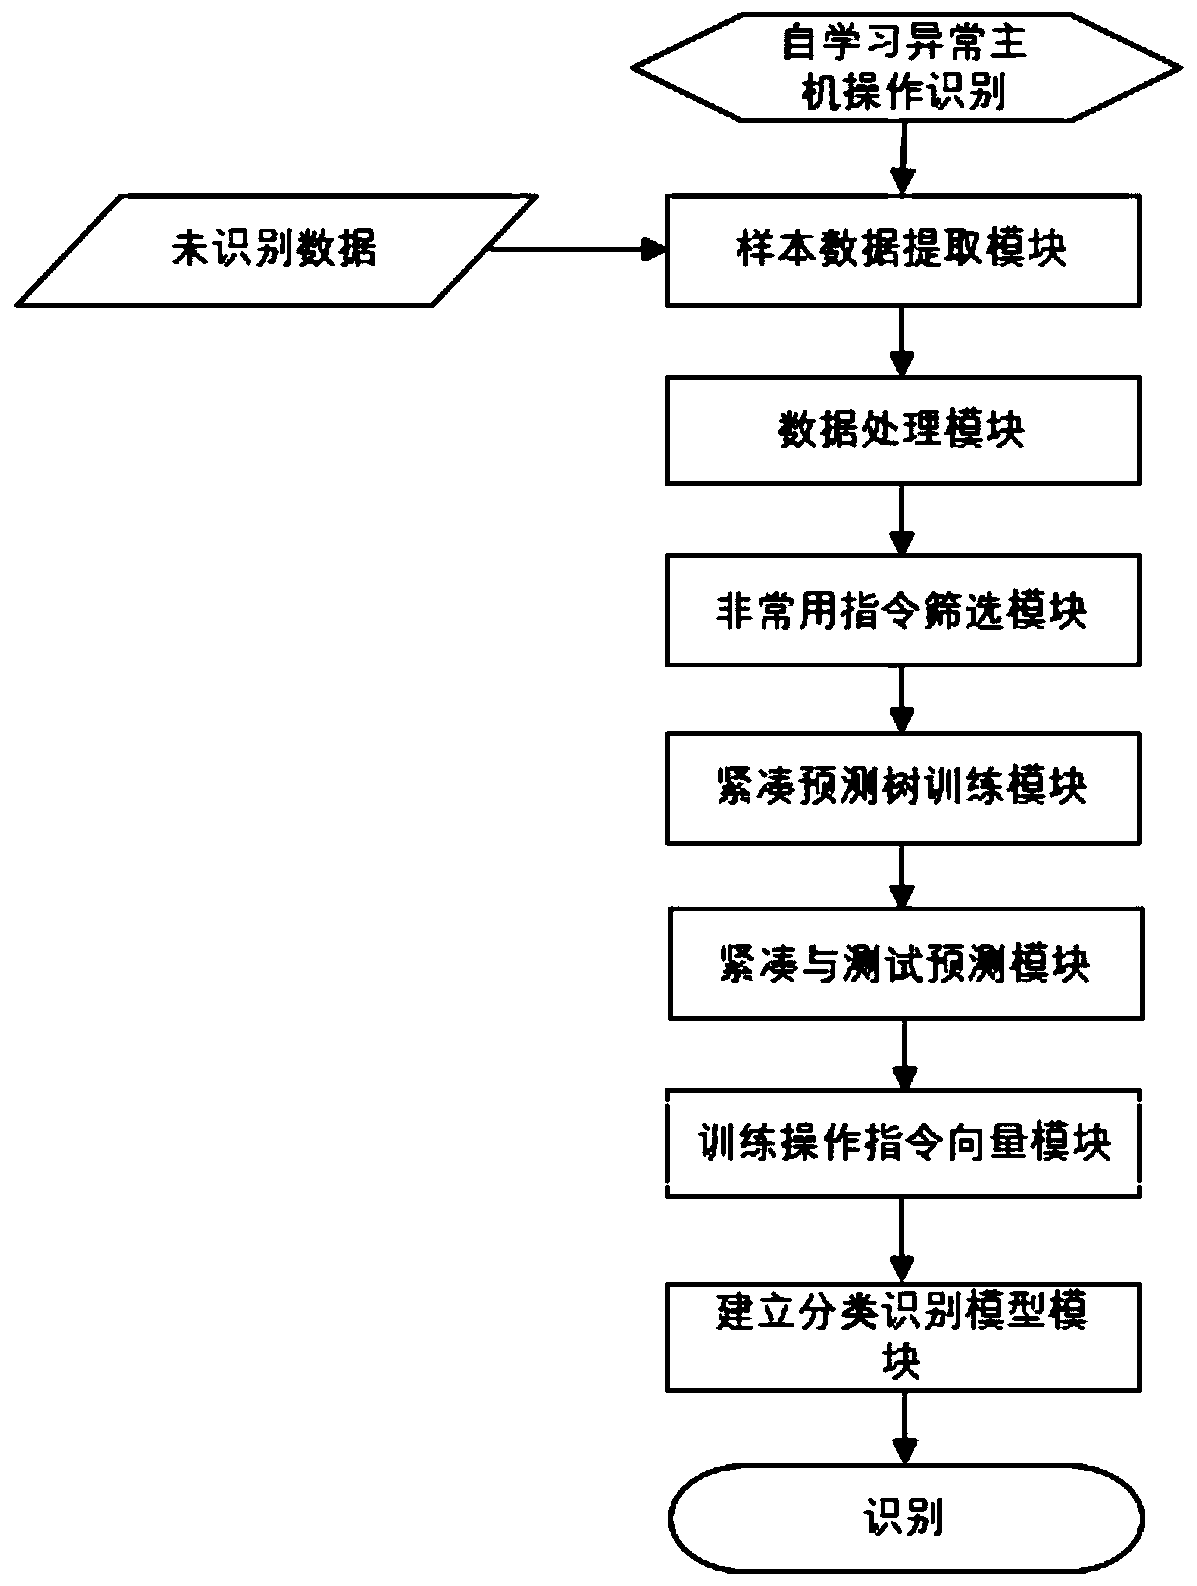 Host operation instruction exception identification method and system